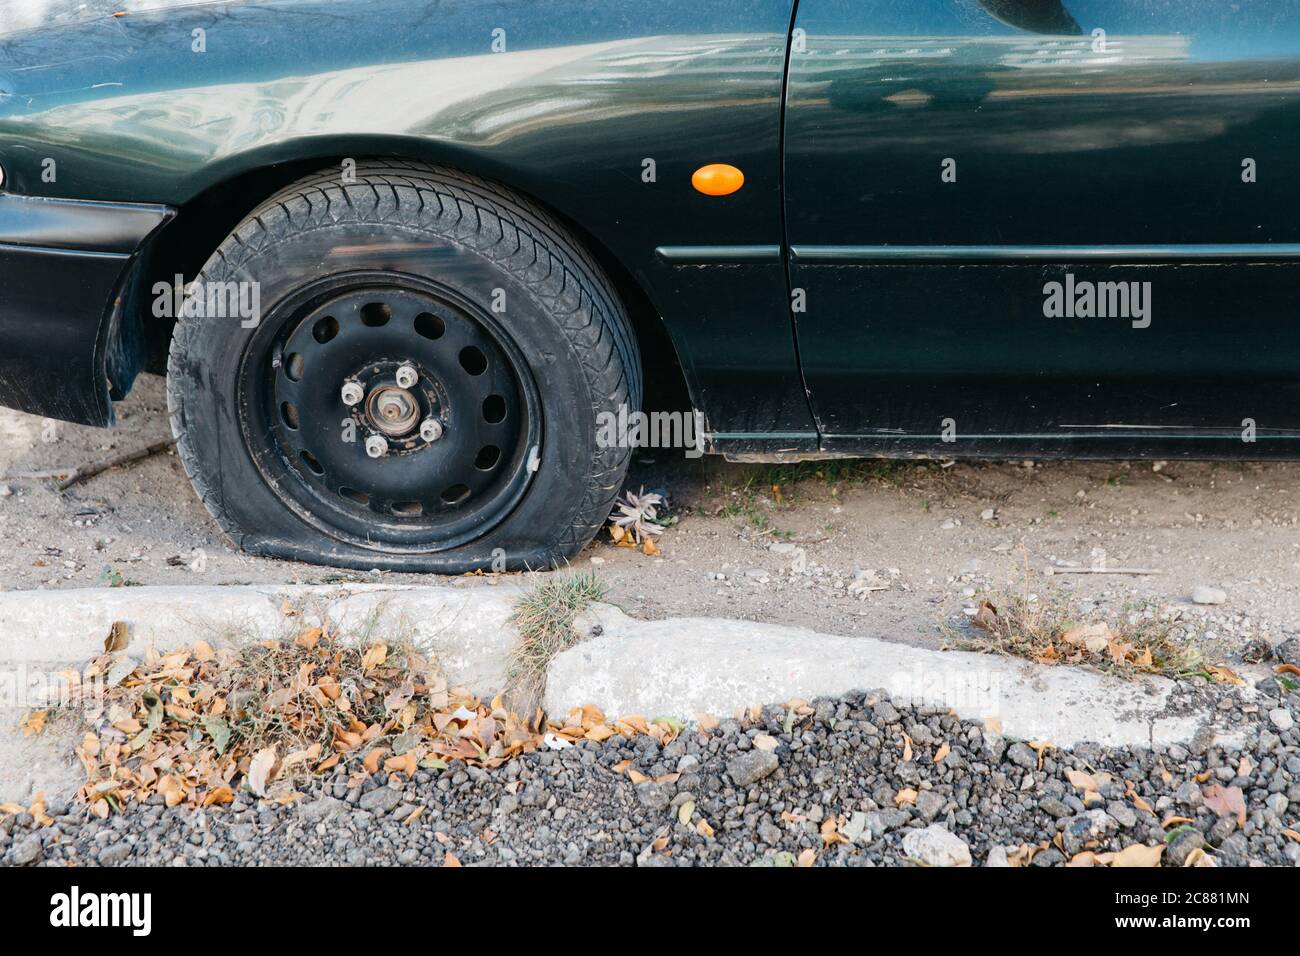 Green car with a punctured wheel in the open air. Damaged flat tire of a car. Stock Photo